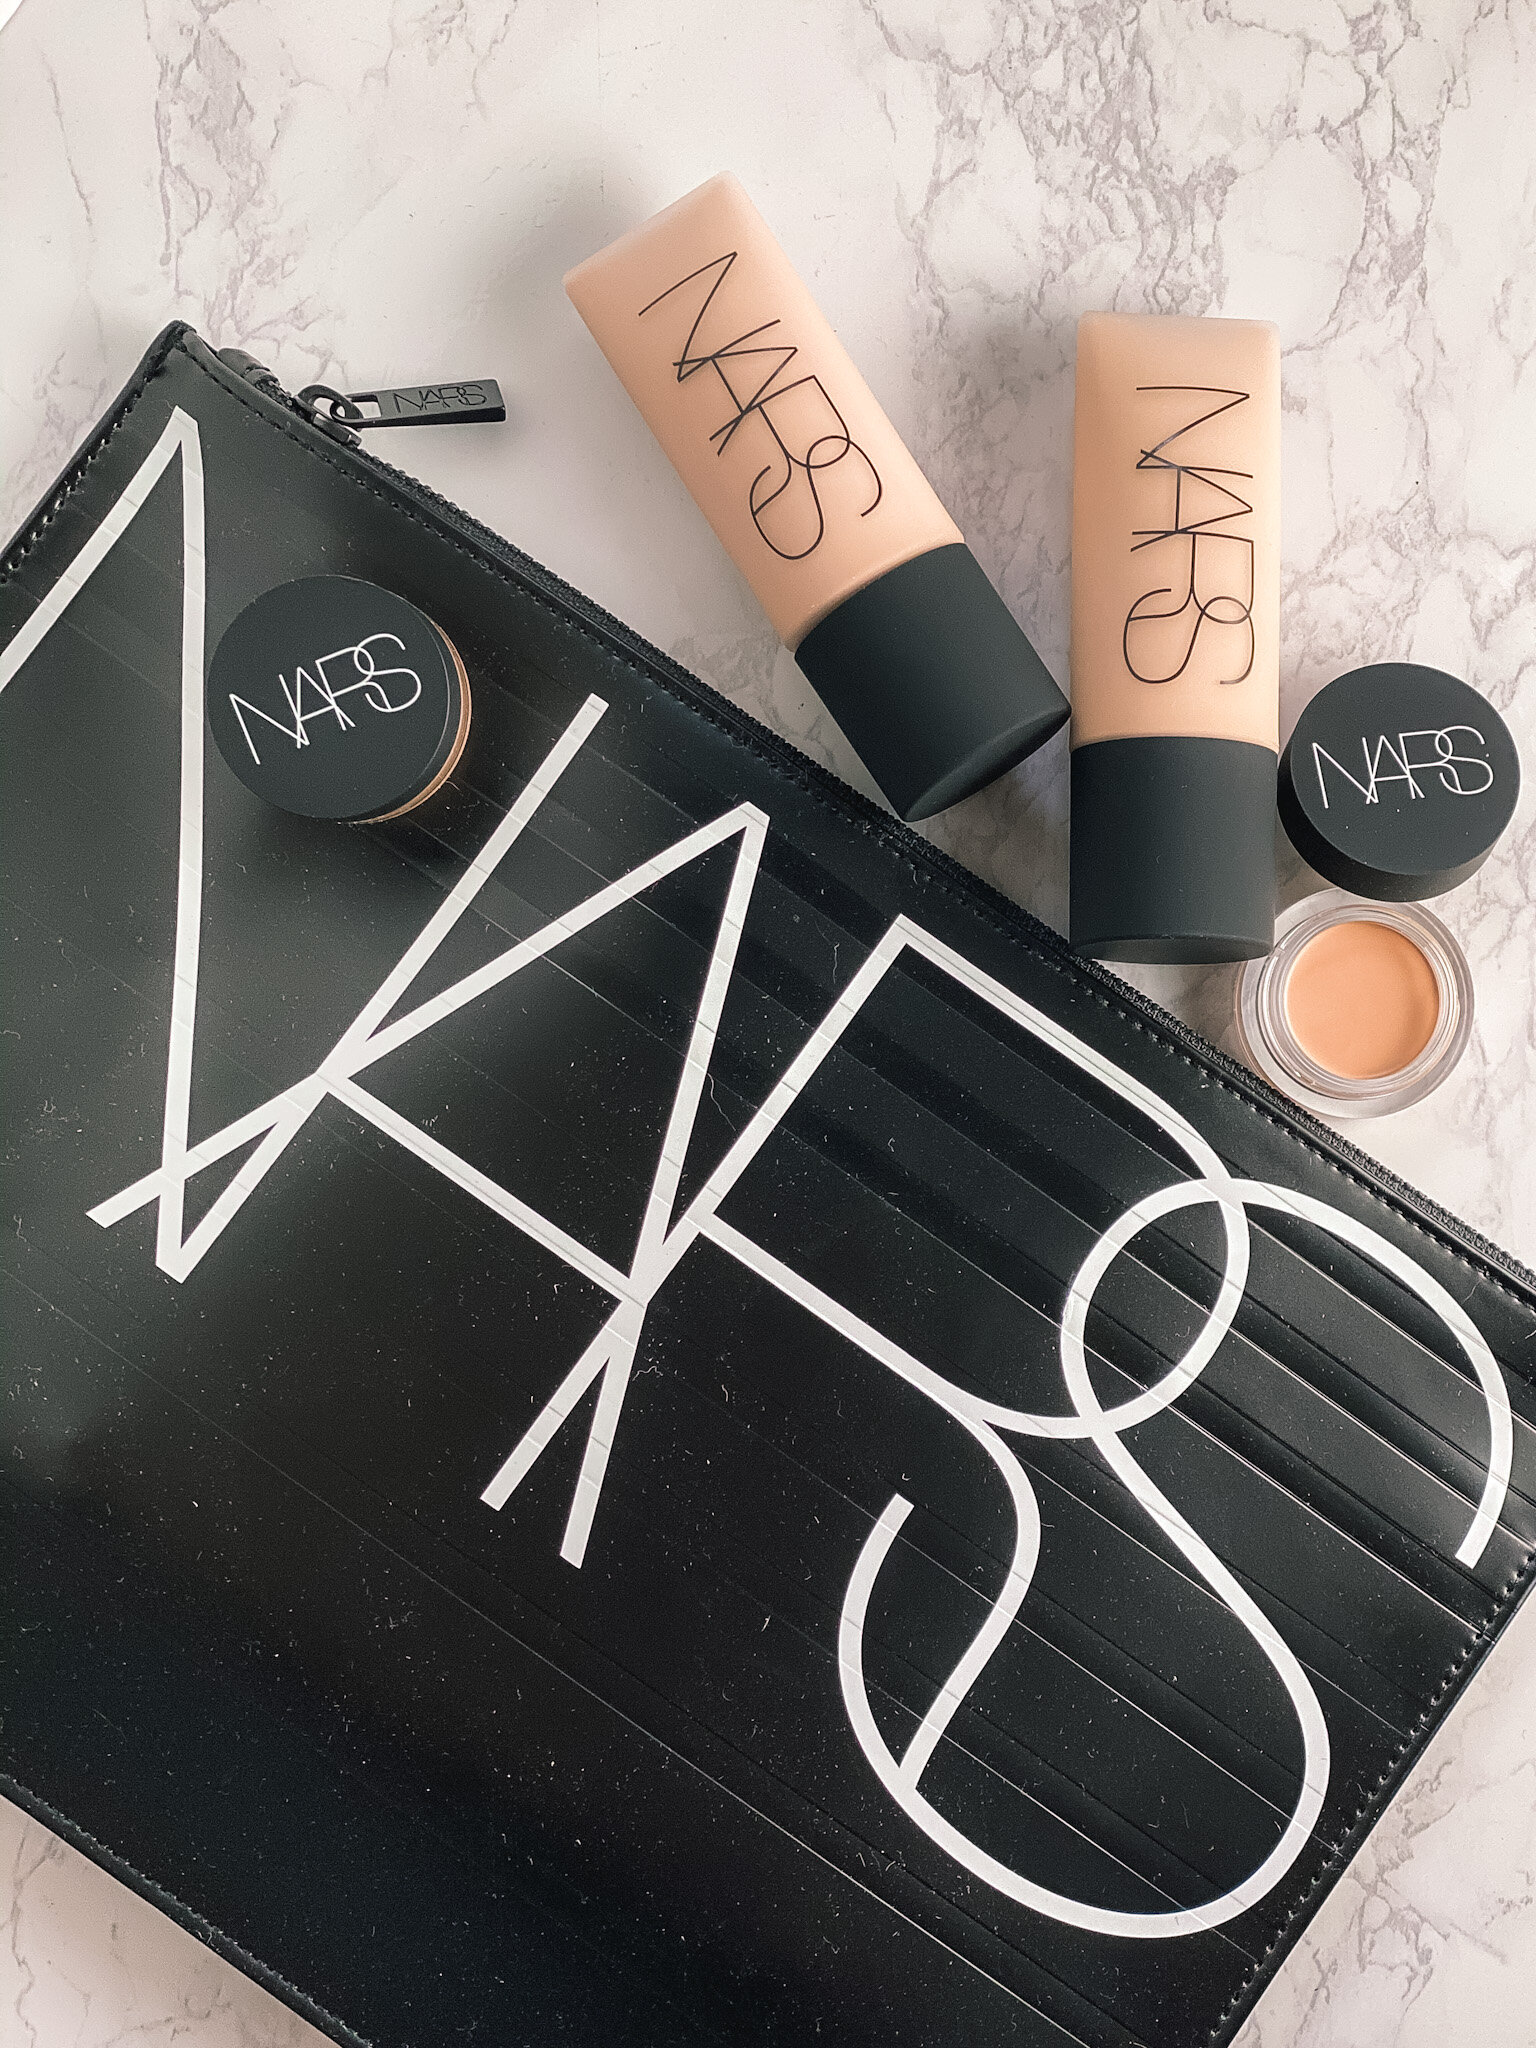 NARS Soft Matte Complete Foundation Review + Wear Test! 